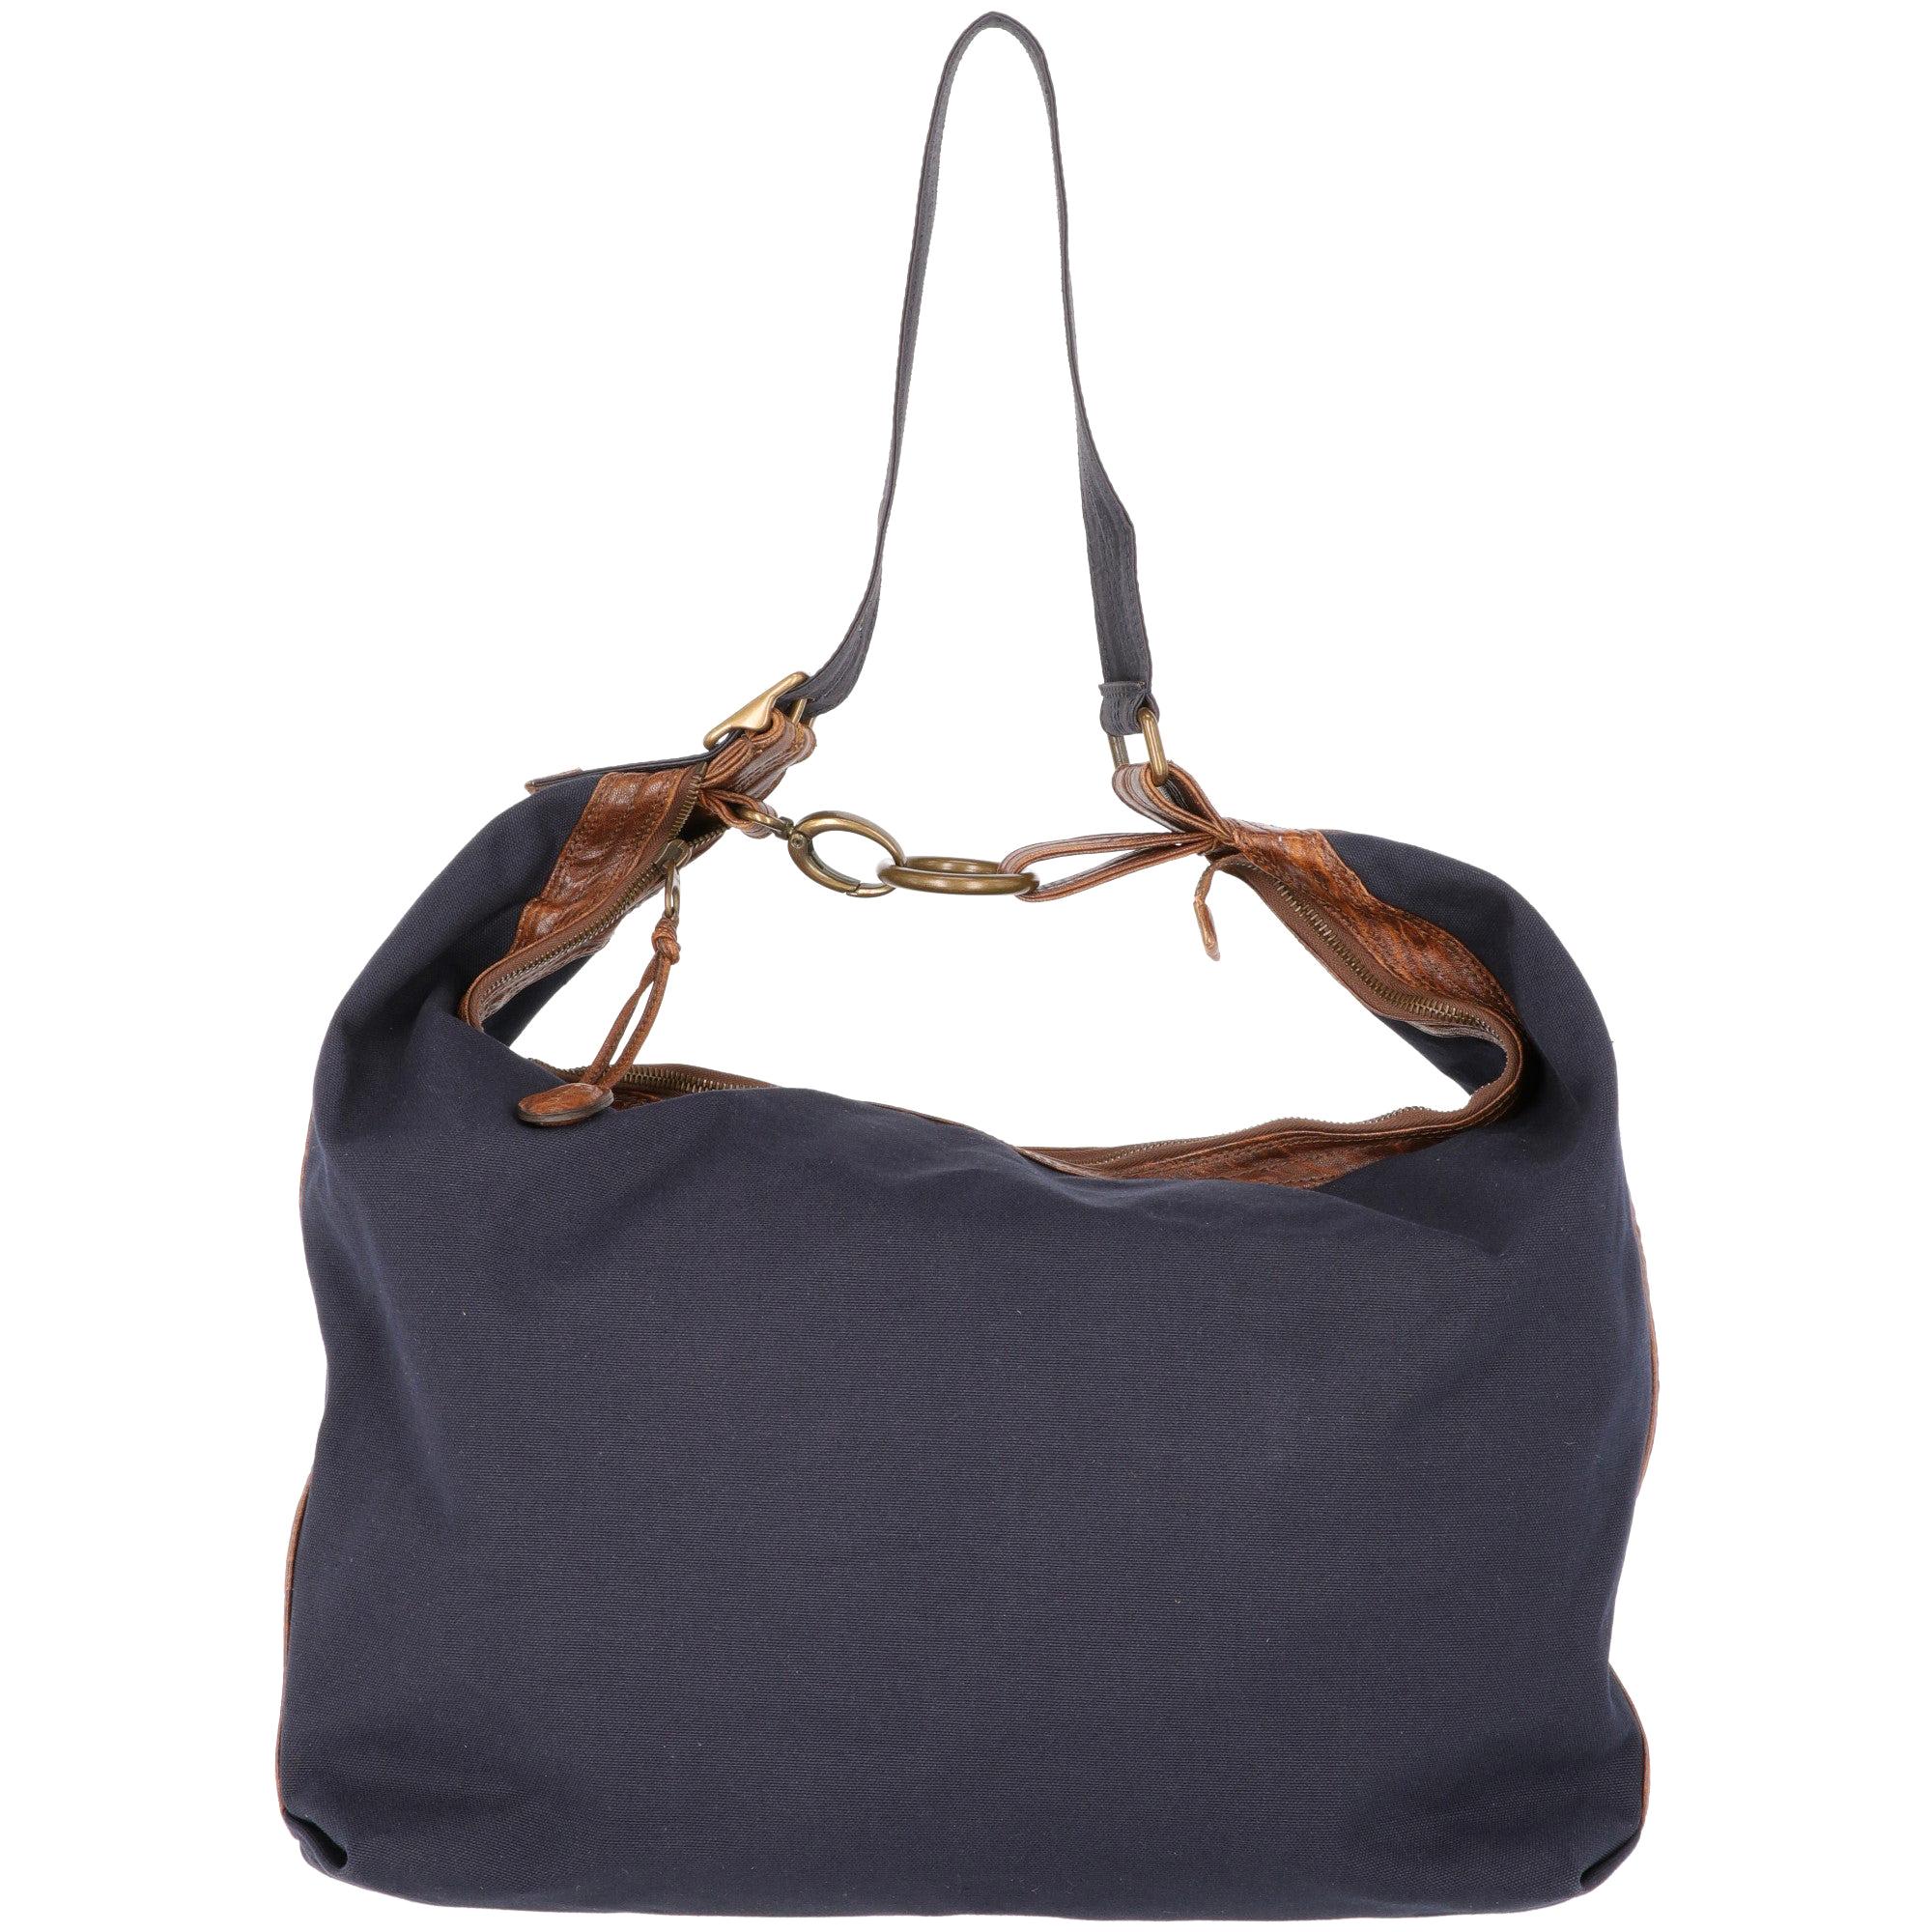 2000s Marni Blue Cotton Tote Bag with Brown leather details